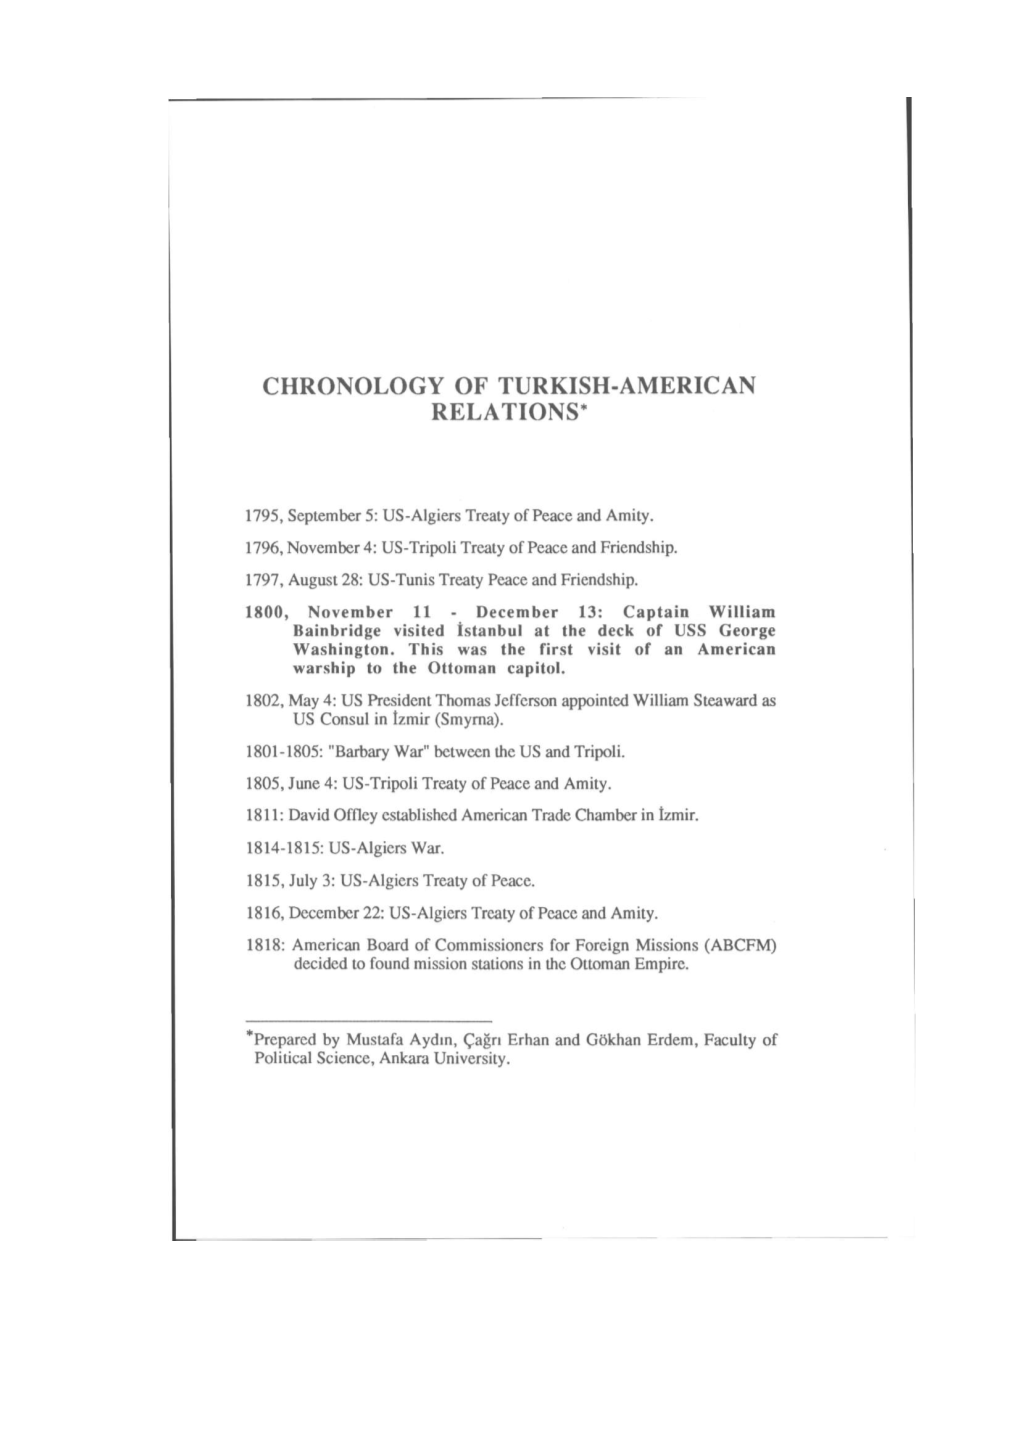 Chronology of Turkish-American Relations*